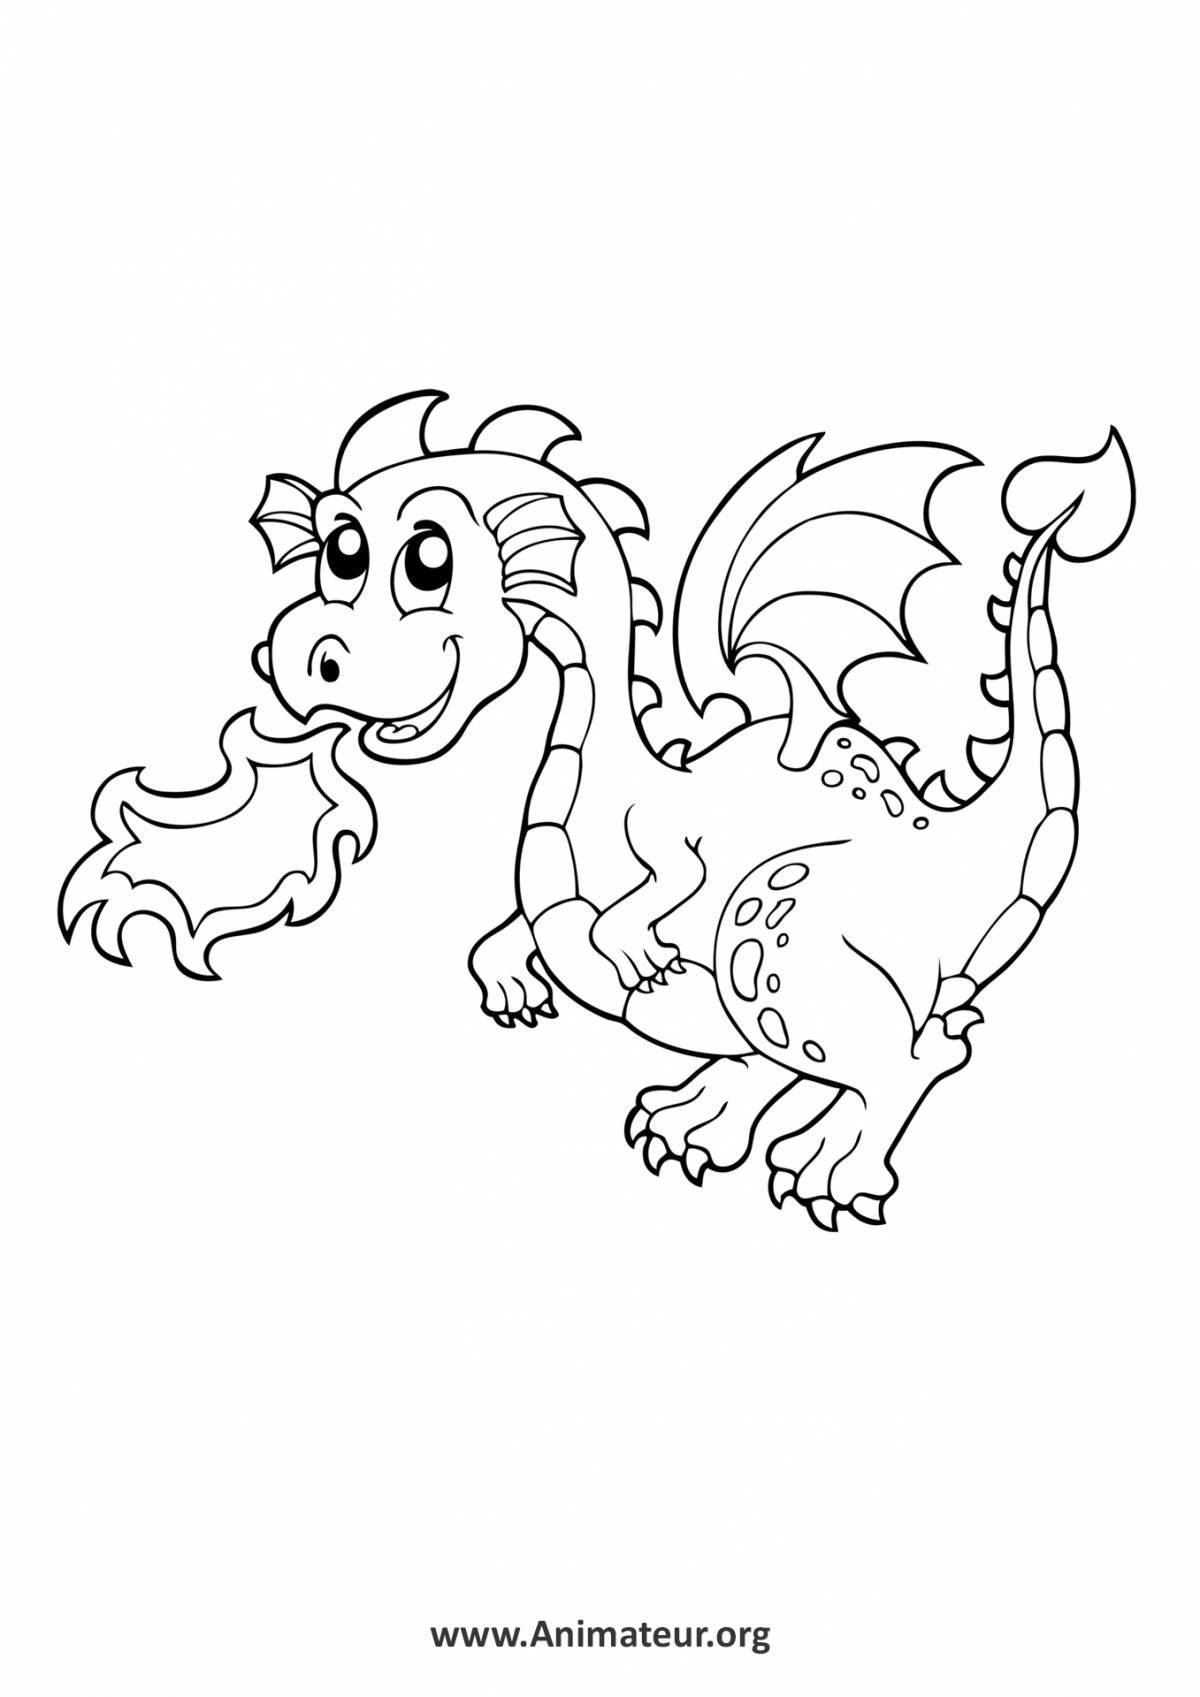 Fancy coloring dragons for children 6-7 years old